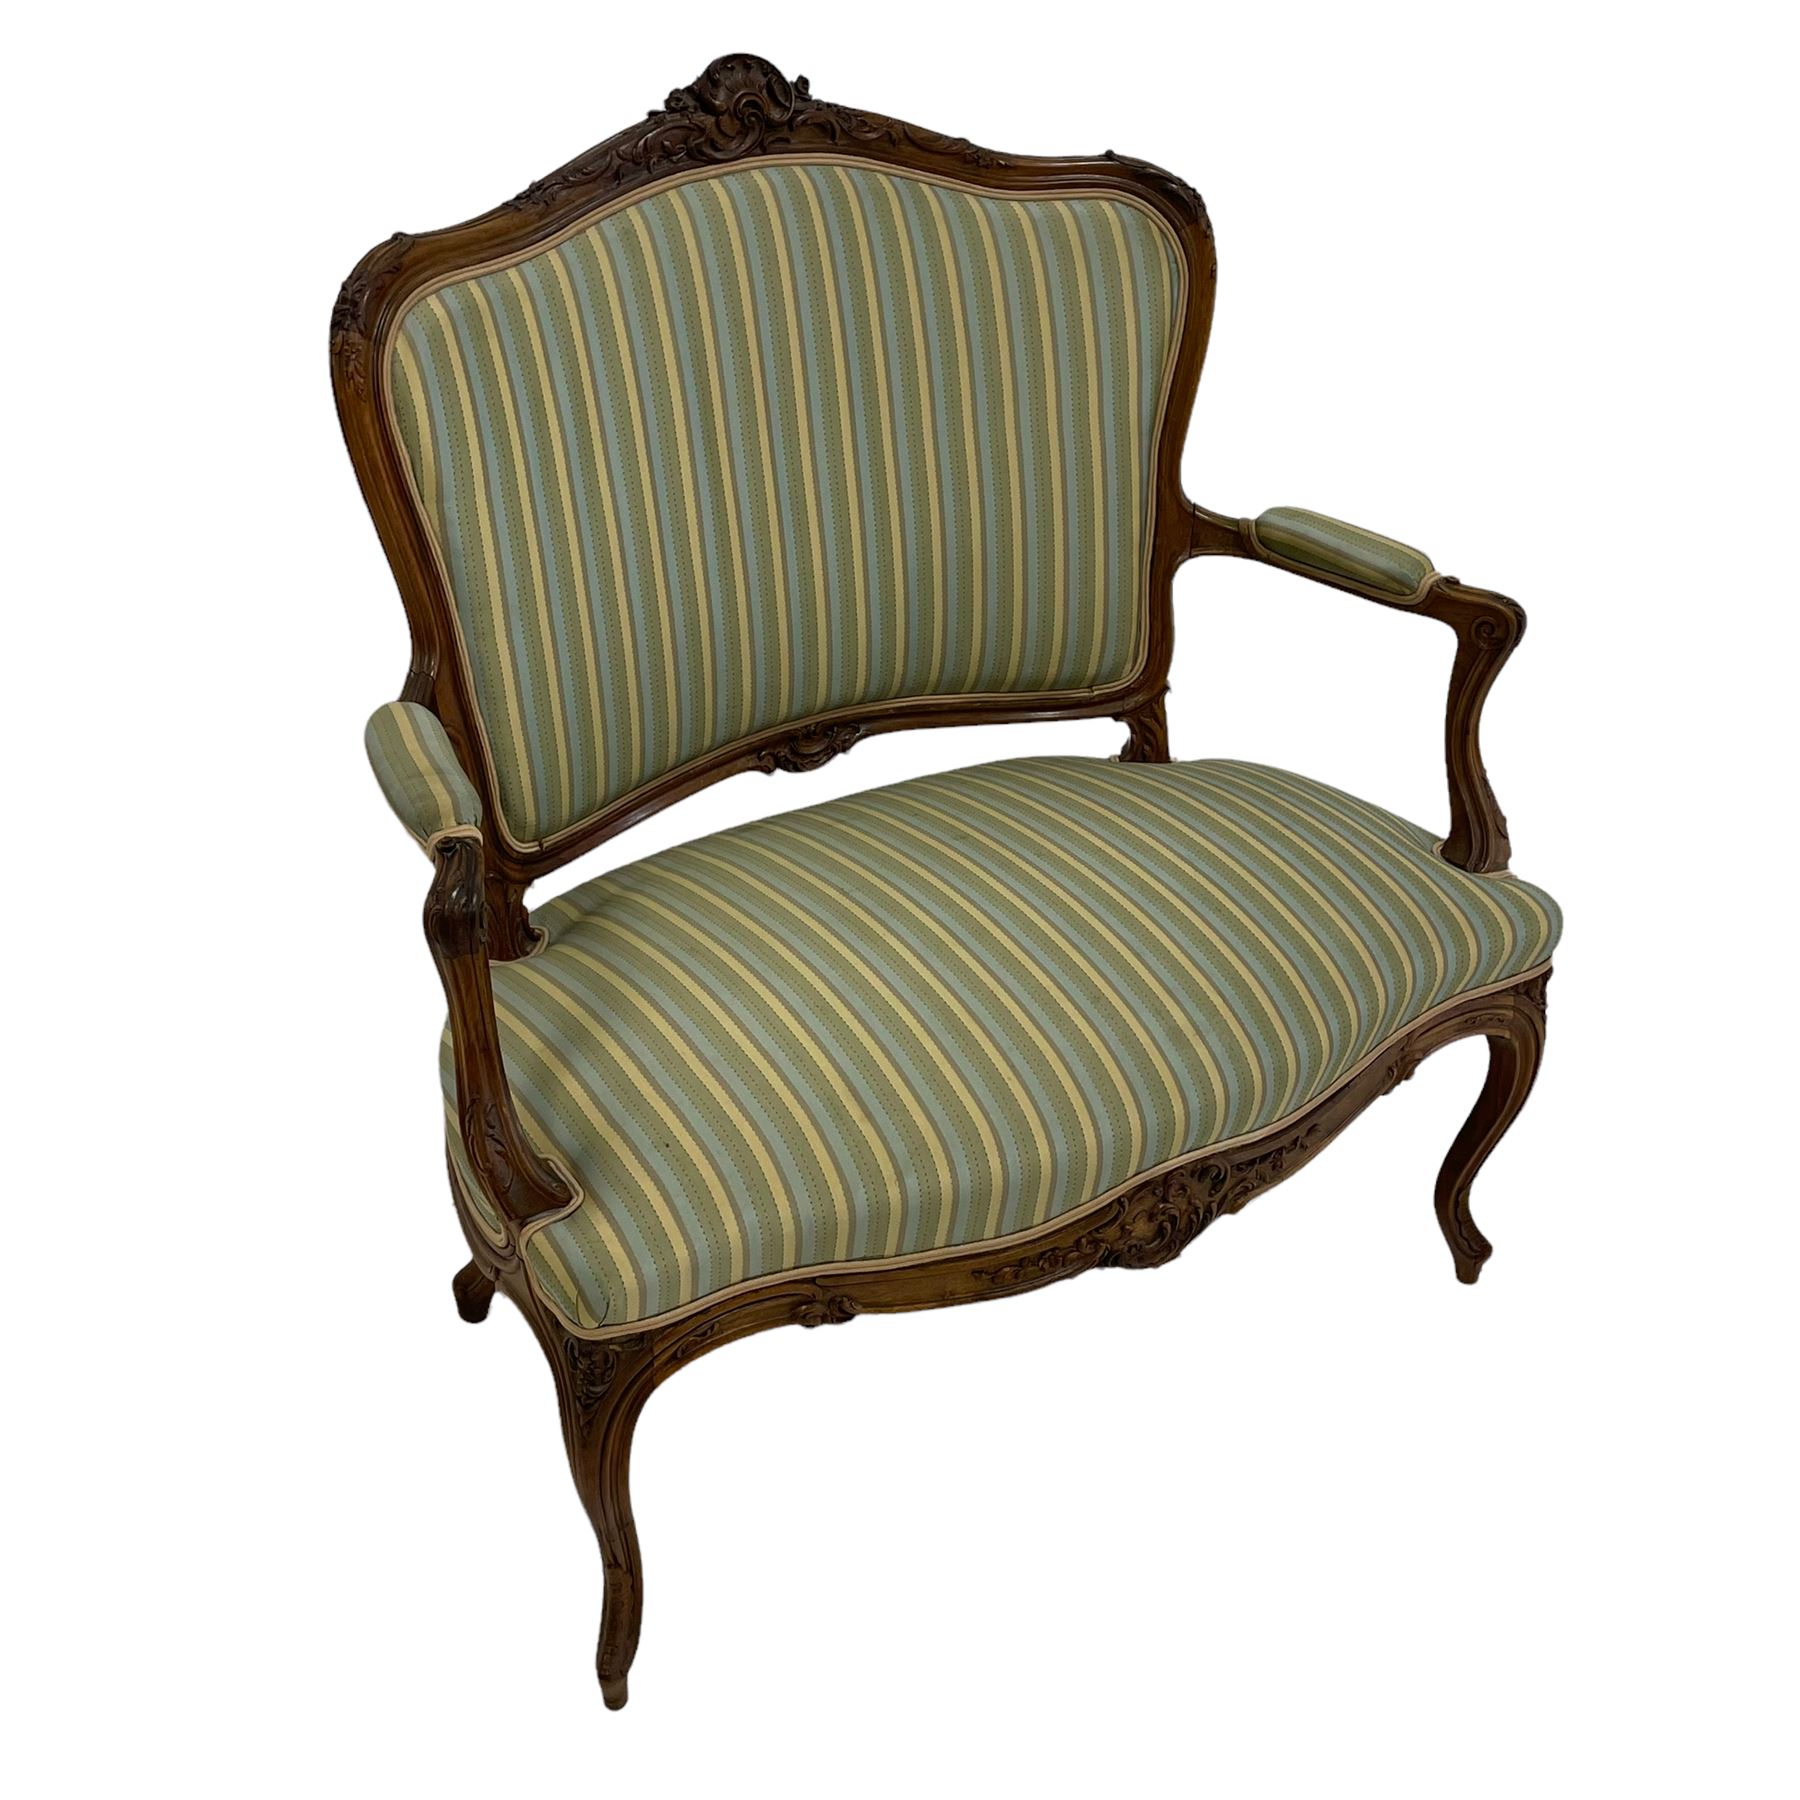 Late 20th century French walnut settee - Image 3 of 8